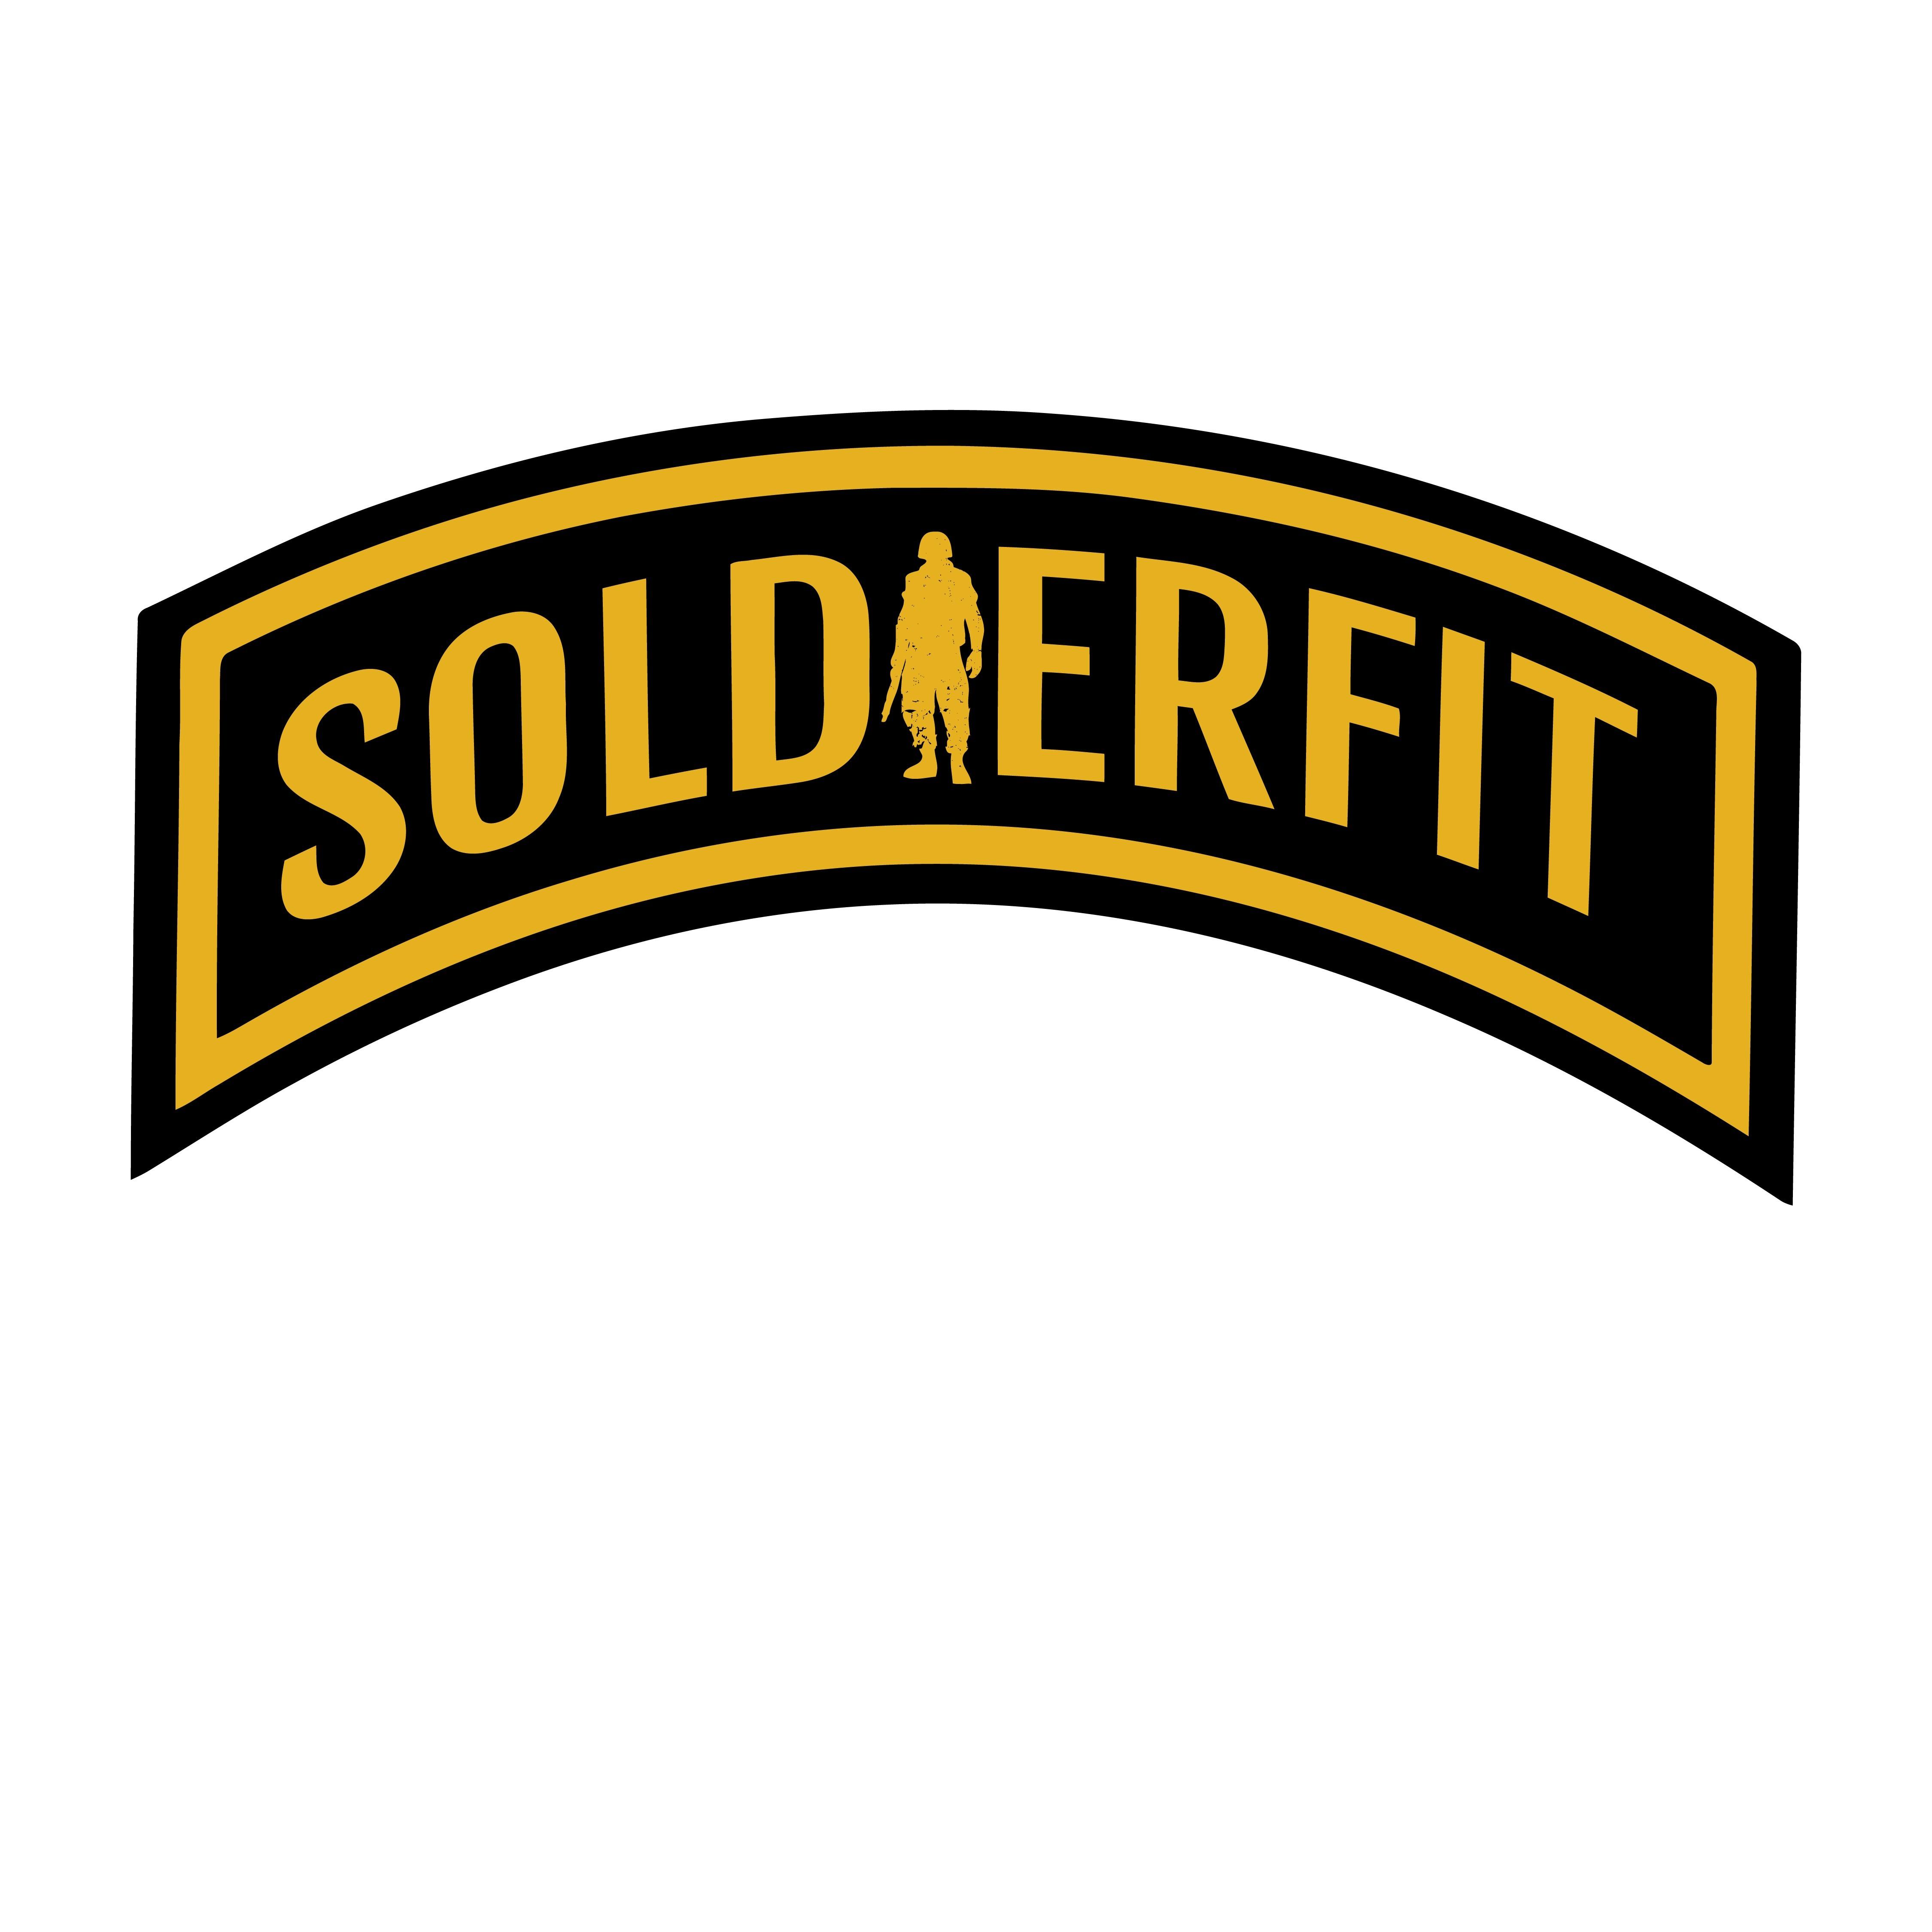 SOLDIERFIT Columbia - Columbia, MD 21046 - (443)864-5040 | ShowMeLocal.com